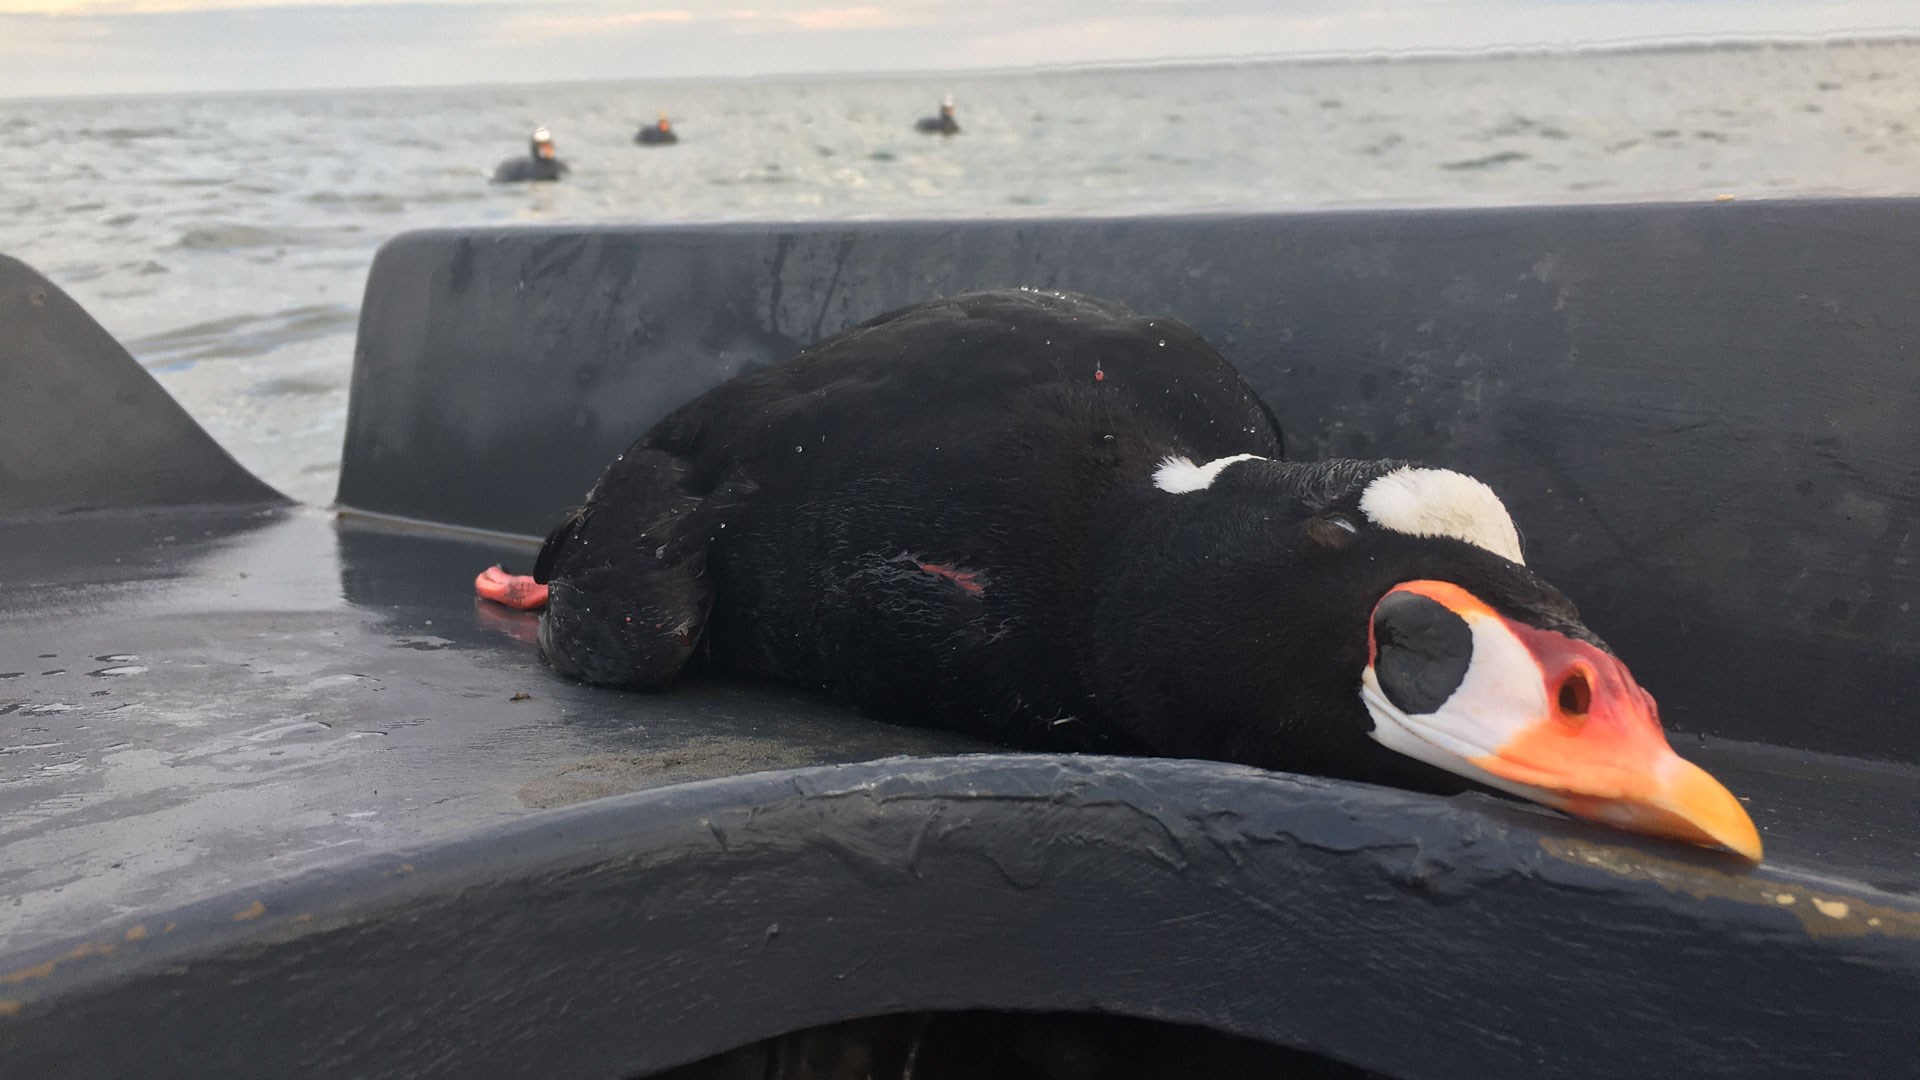 Dead seaduck with decoys in background